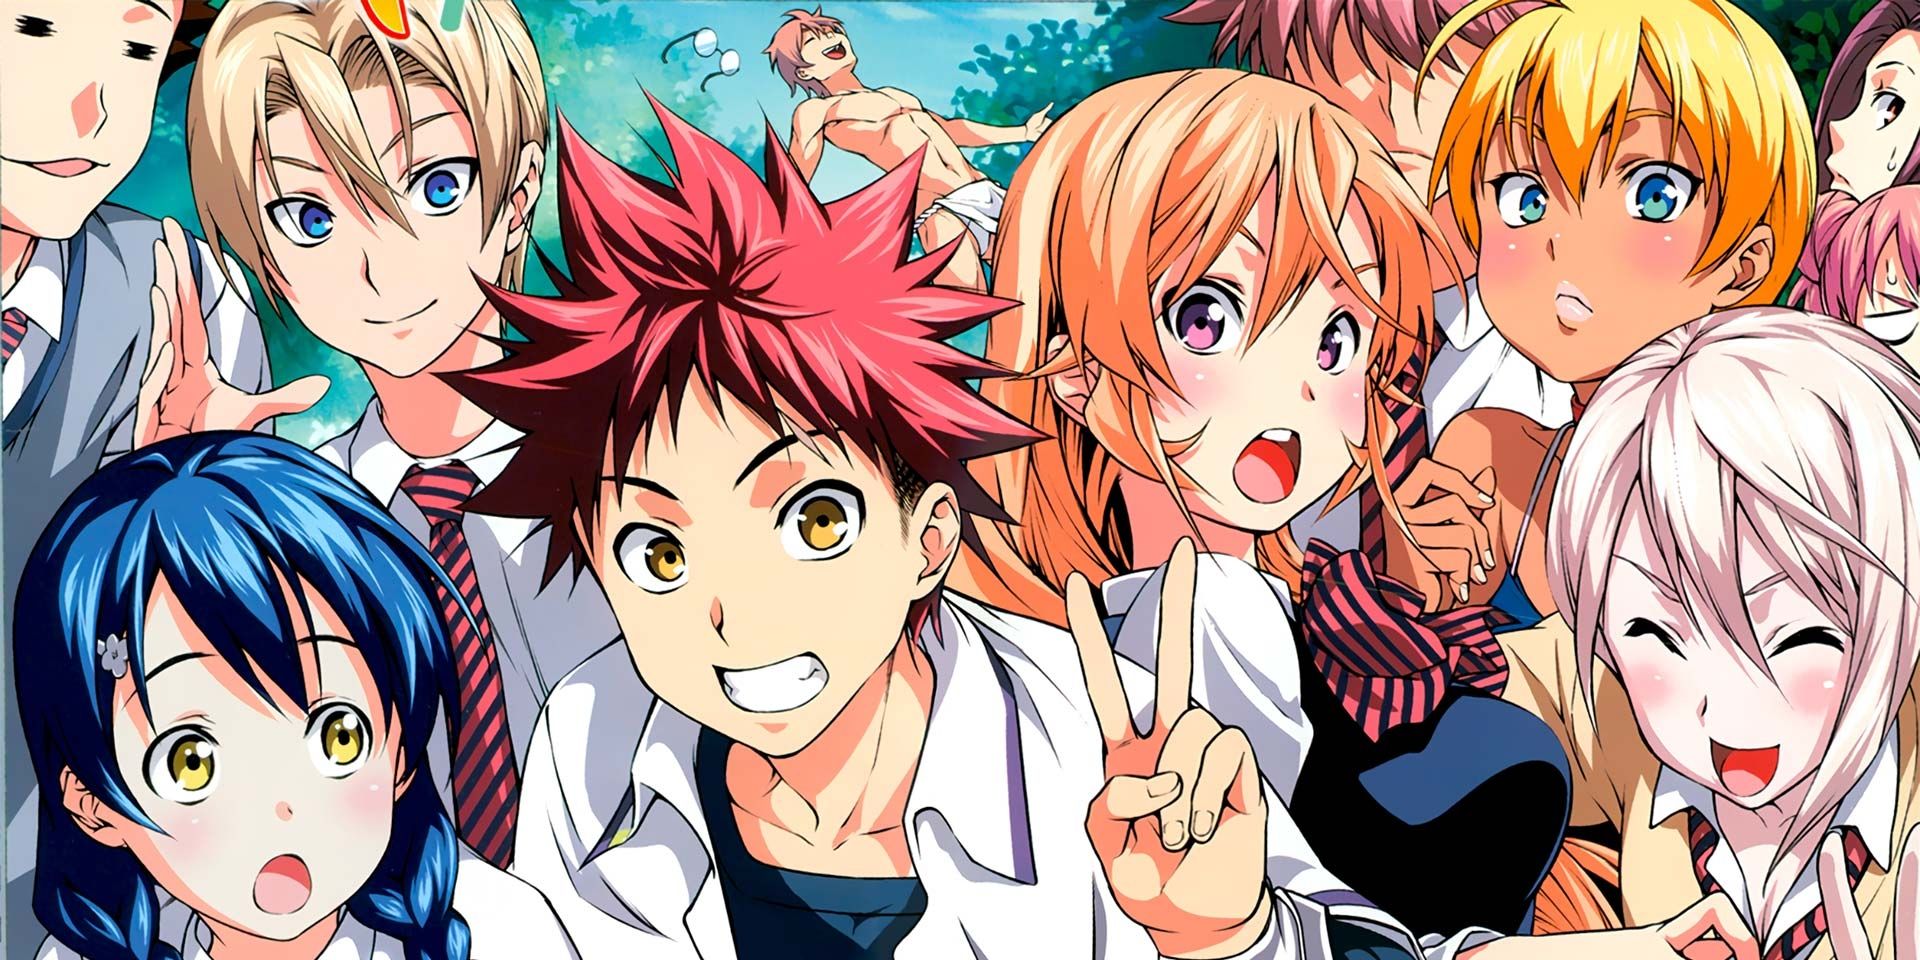 5 Lessons About Cooking & Life Soma Learned in Food Wars!